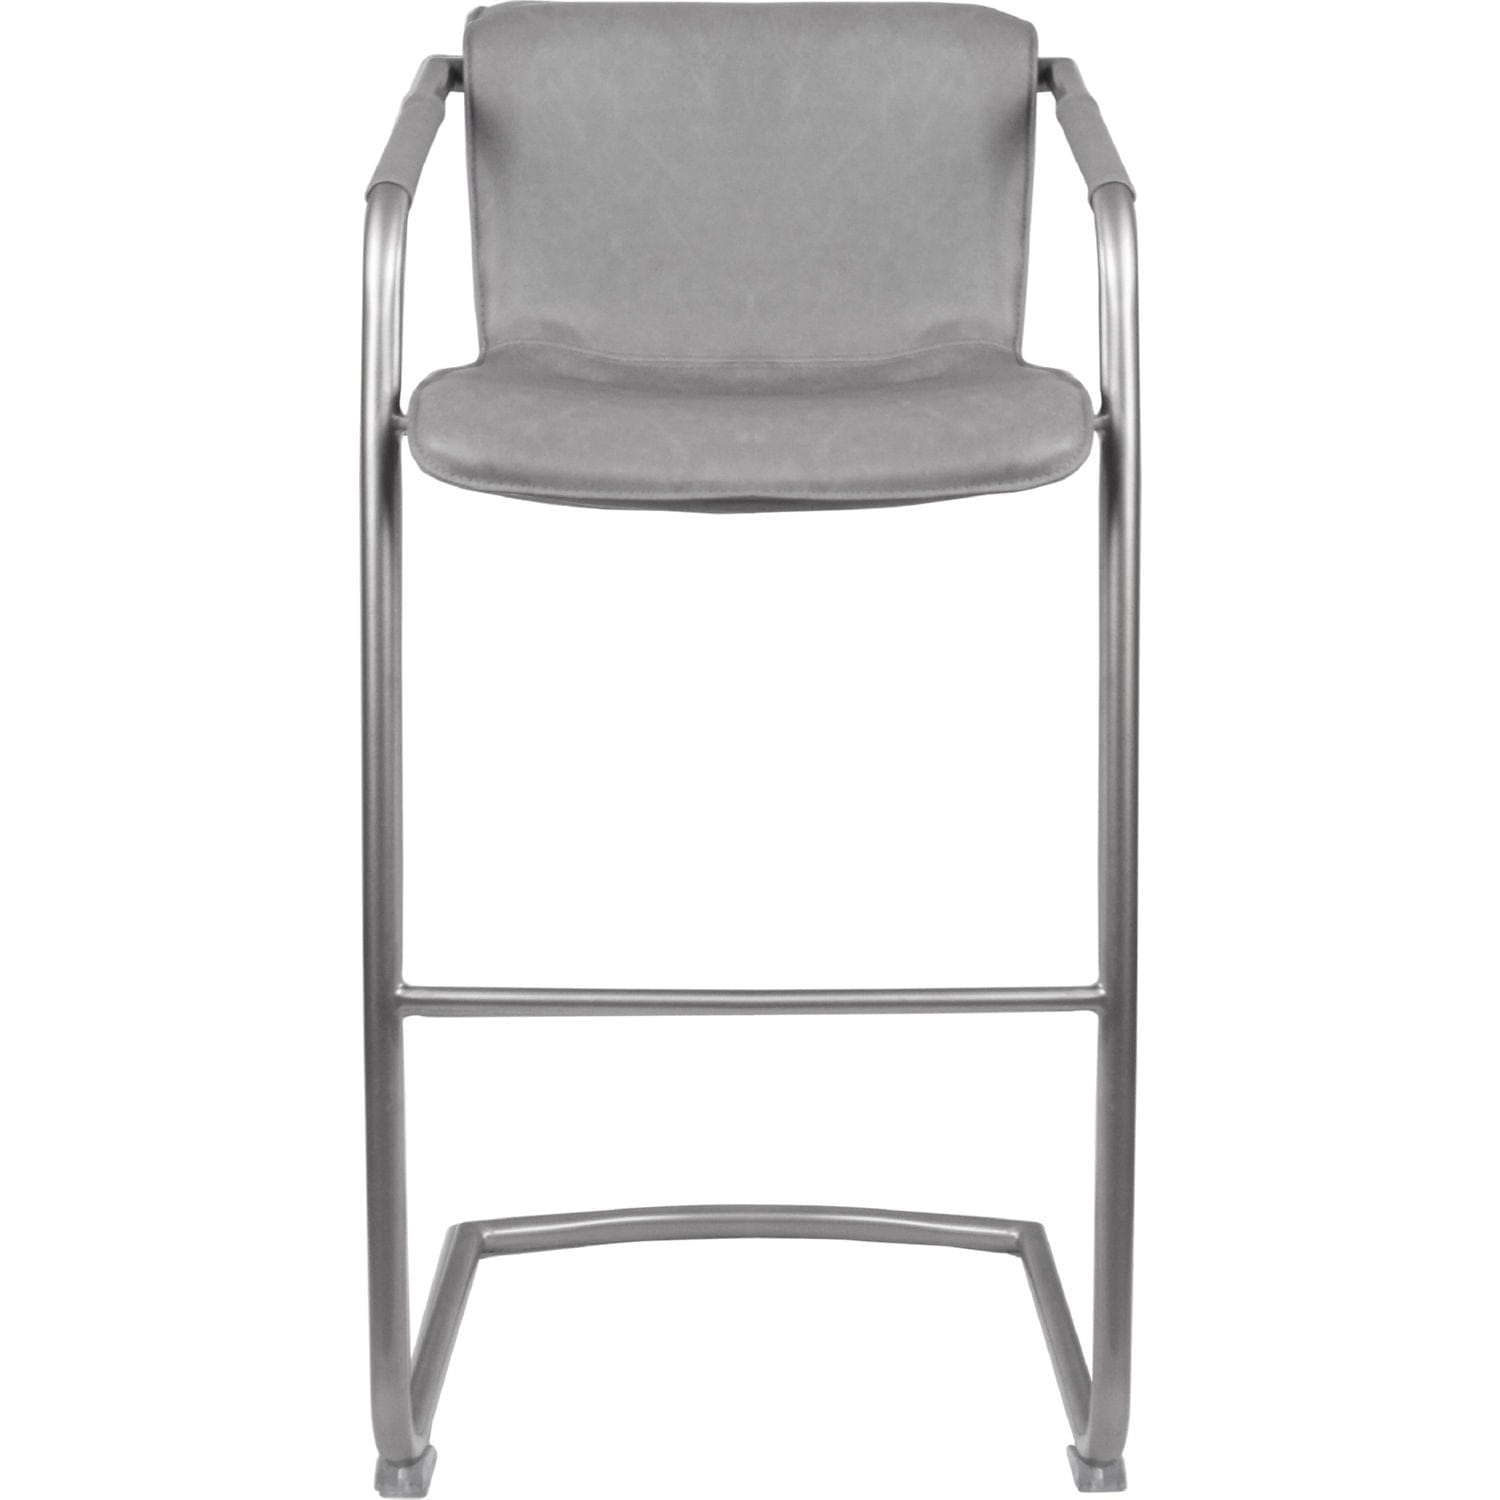 NPD Barstool Antique Graphite Gray NPD - Indy PU Bar Stool w/ Arms Rubbed Gold Frame | 1060003-215